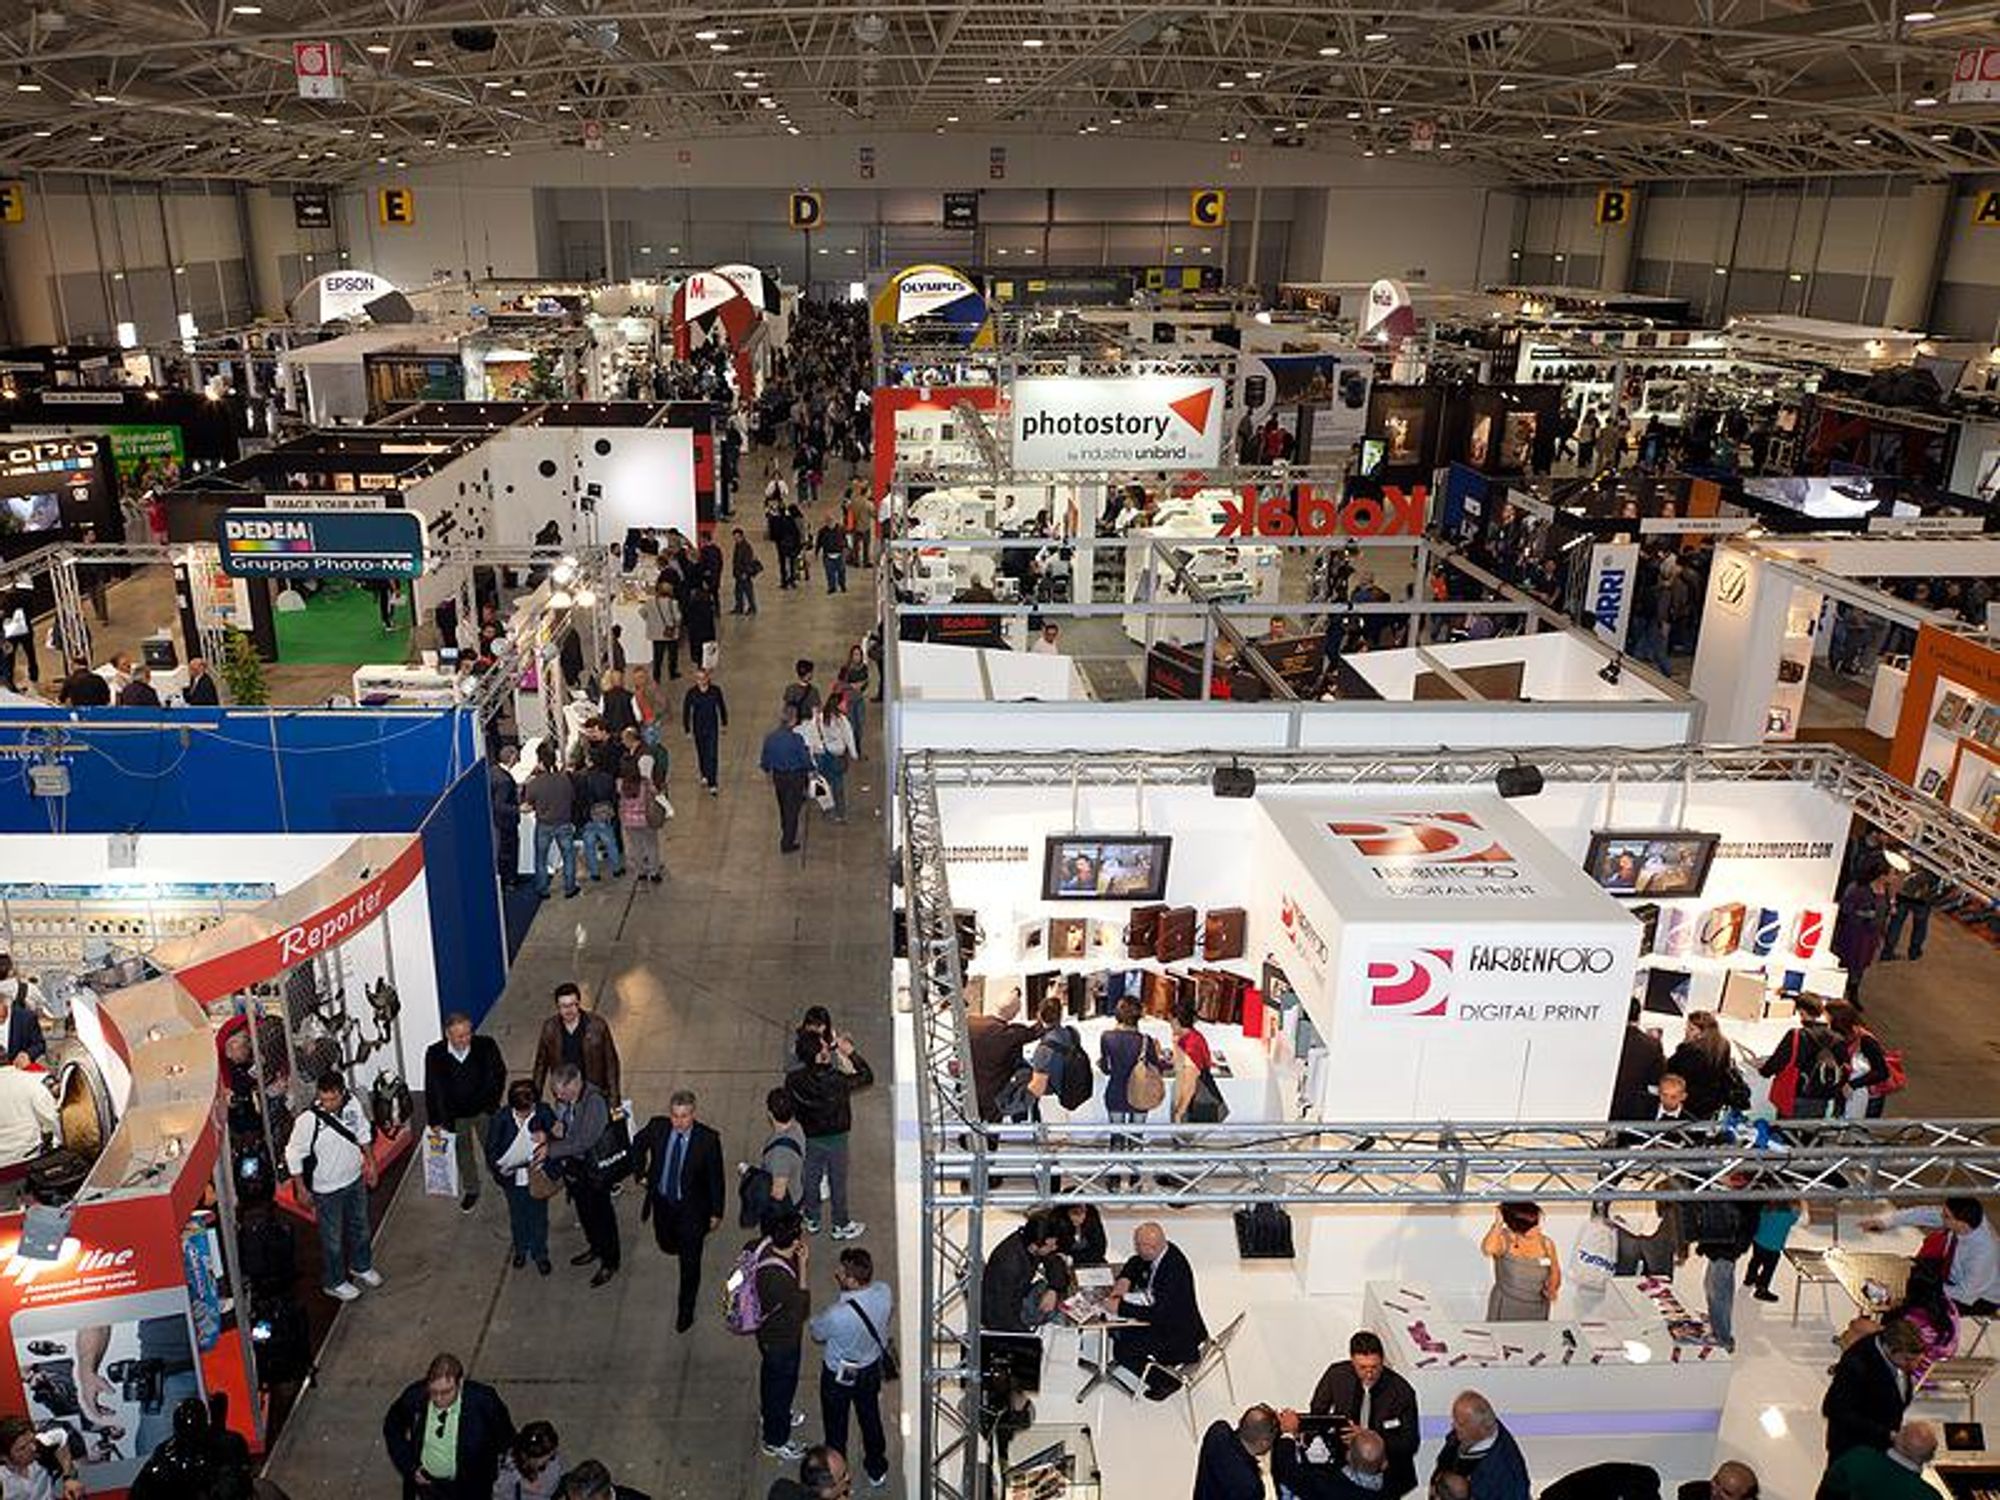 Tradeshow booths